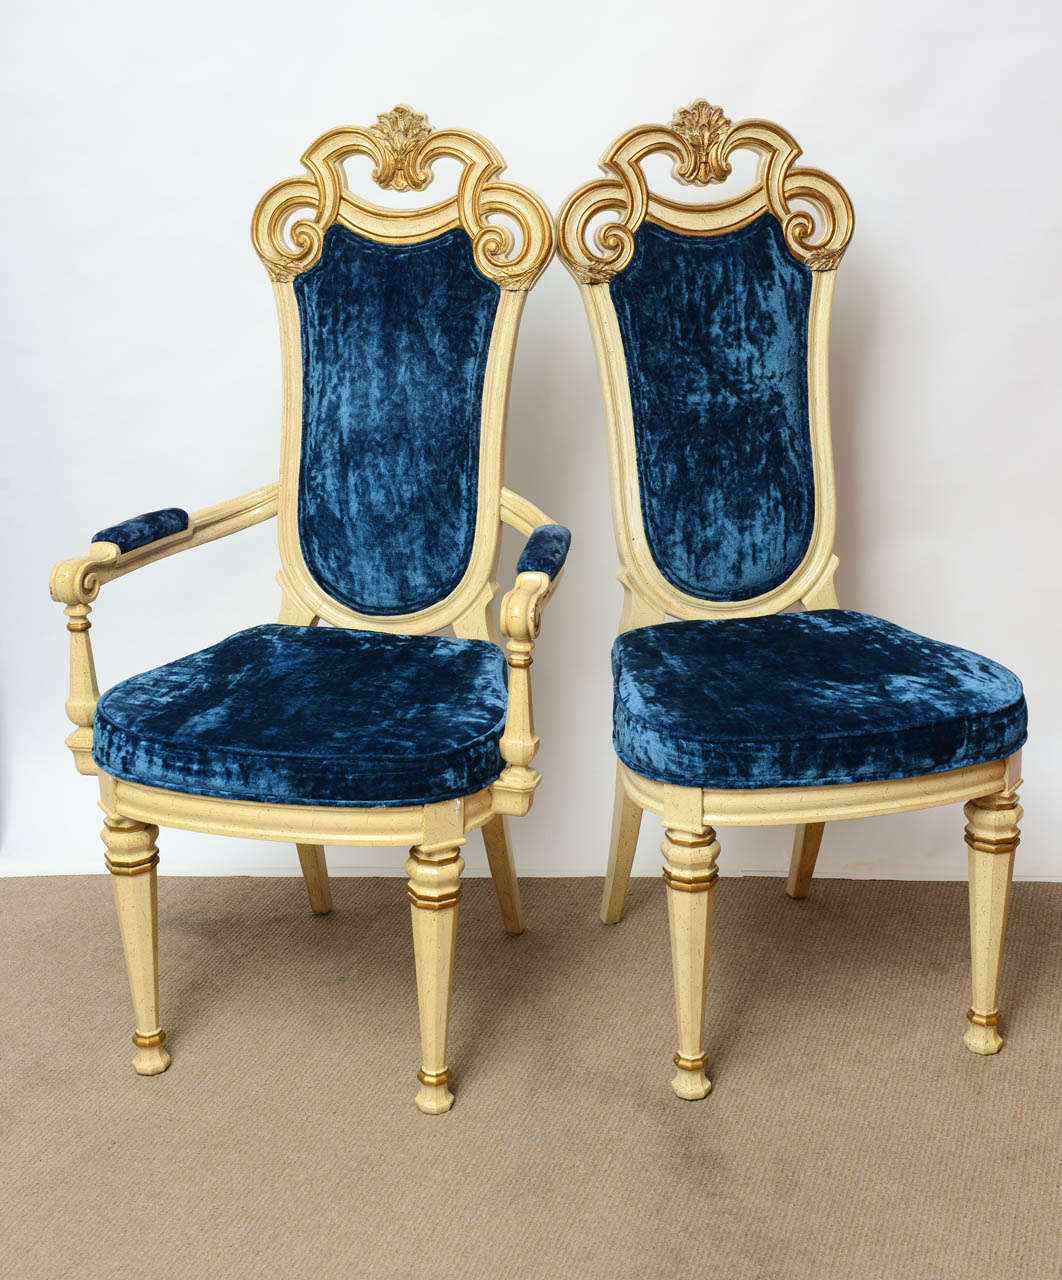 This 10 Hollywood regency venetian carved high back dining Chairs are in very nice vintage condition. The original blue royal velvet is in perfect condition that bring more glam on the pieces . The chairs are coming from one of the Miami Mansion and